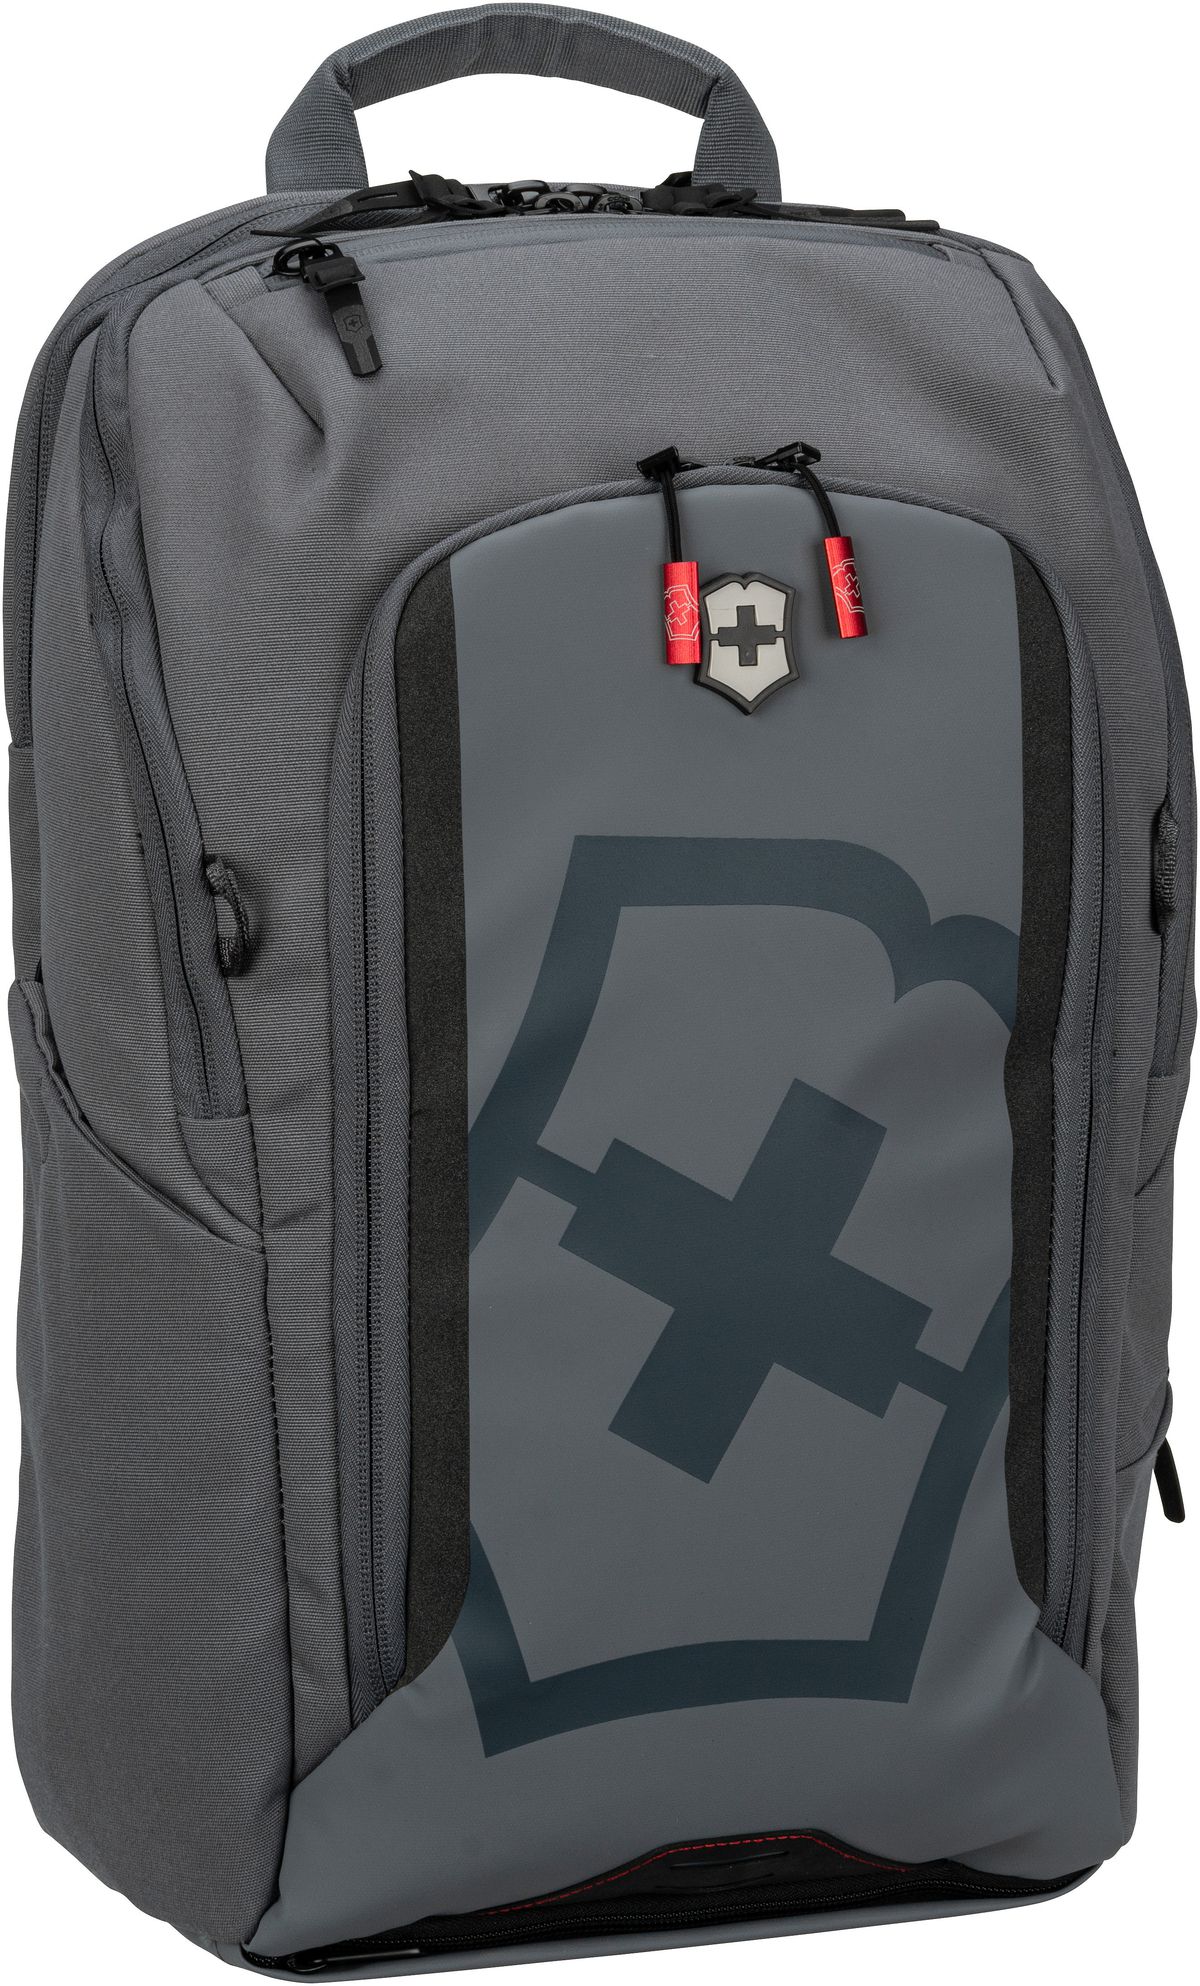 Victorinox Touring 2.0 Commuter Backpack - Stone Grey